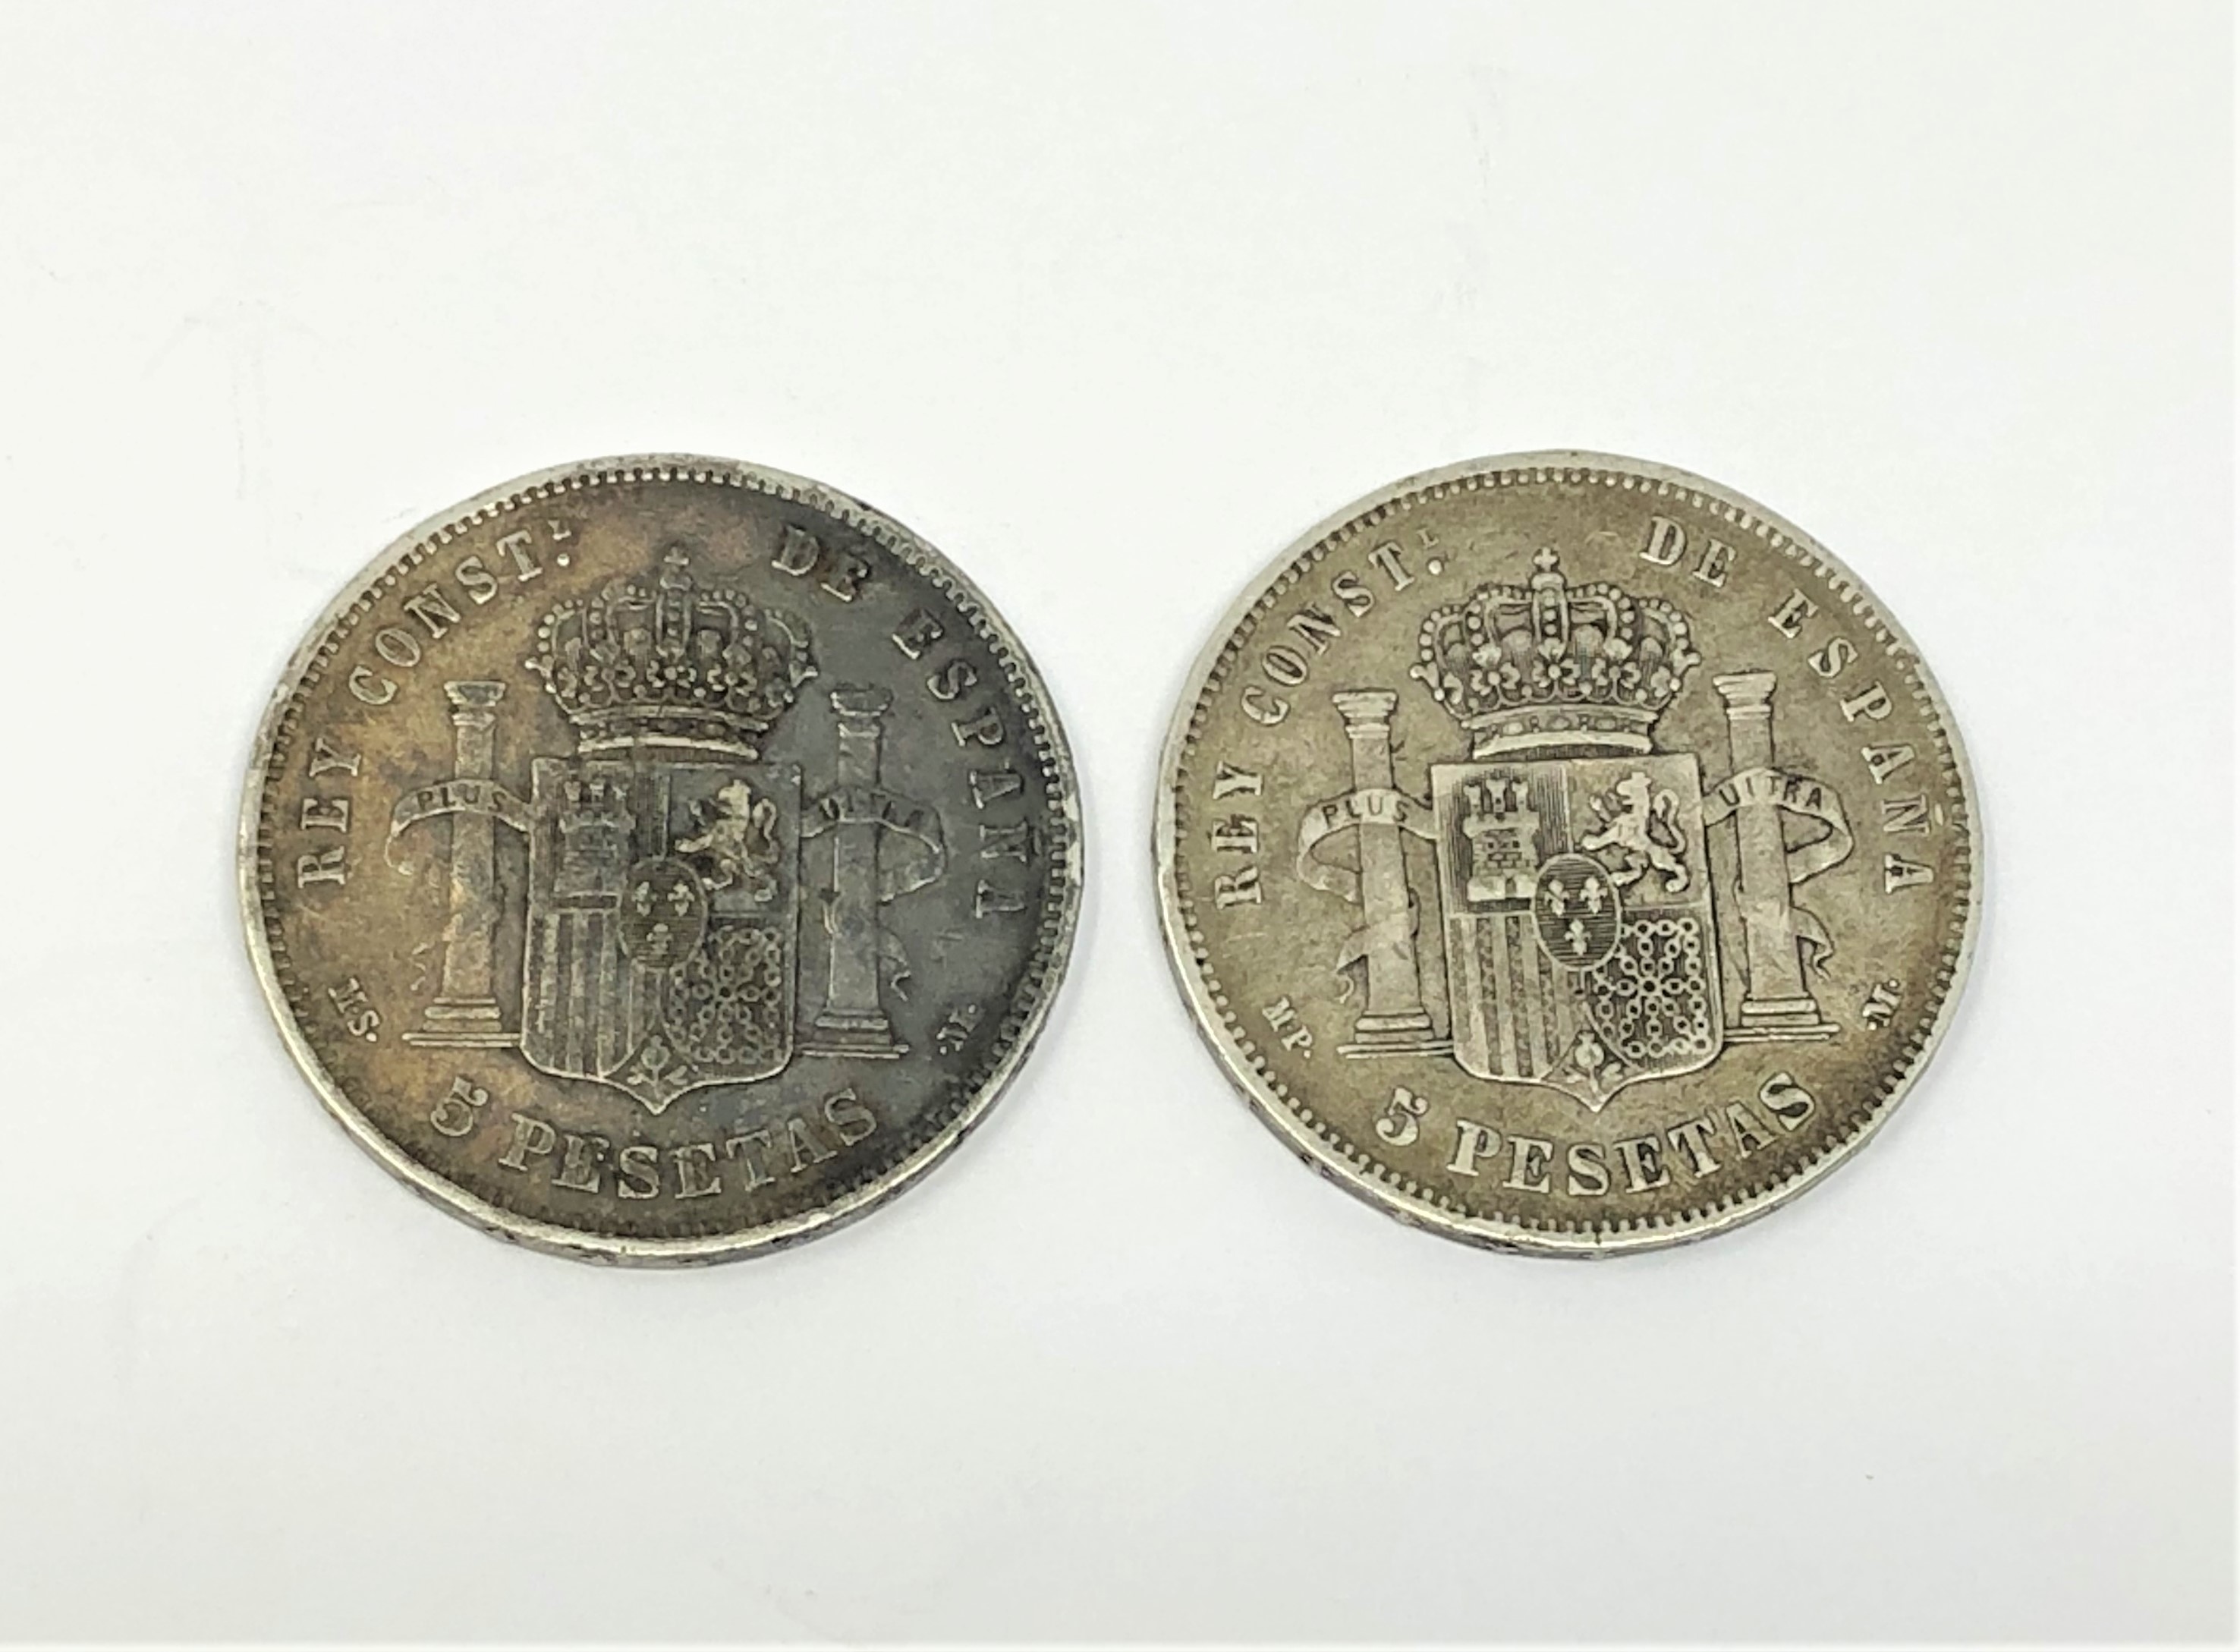 Two silver coins - 1890 & 1885 5 Pesetas. - Image 2 of 2